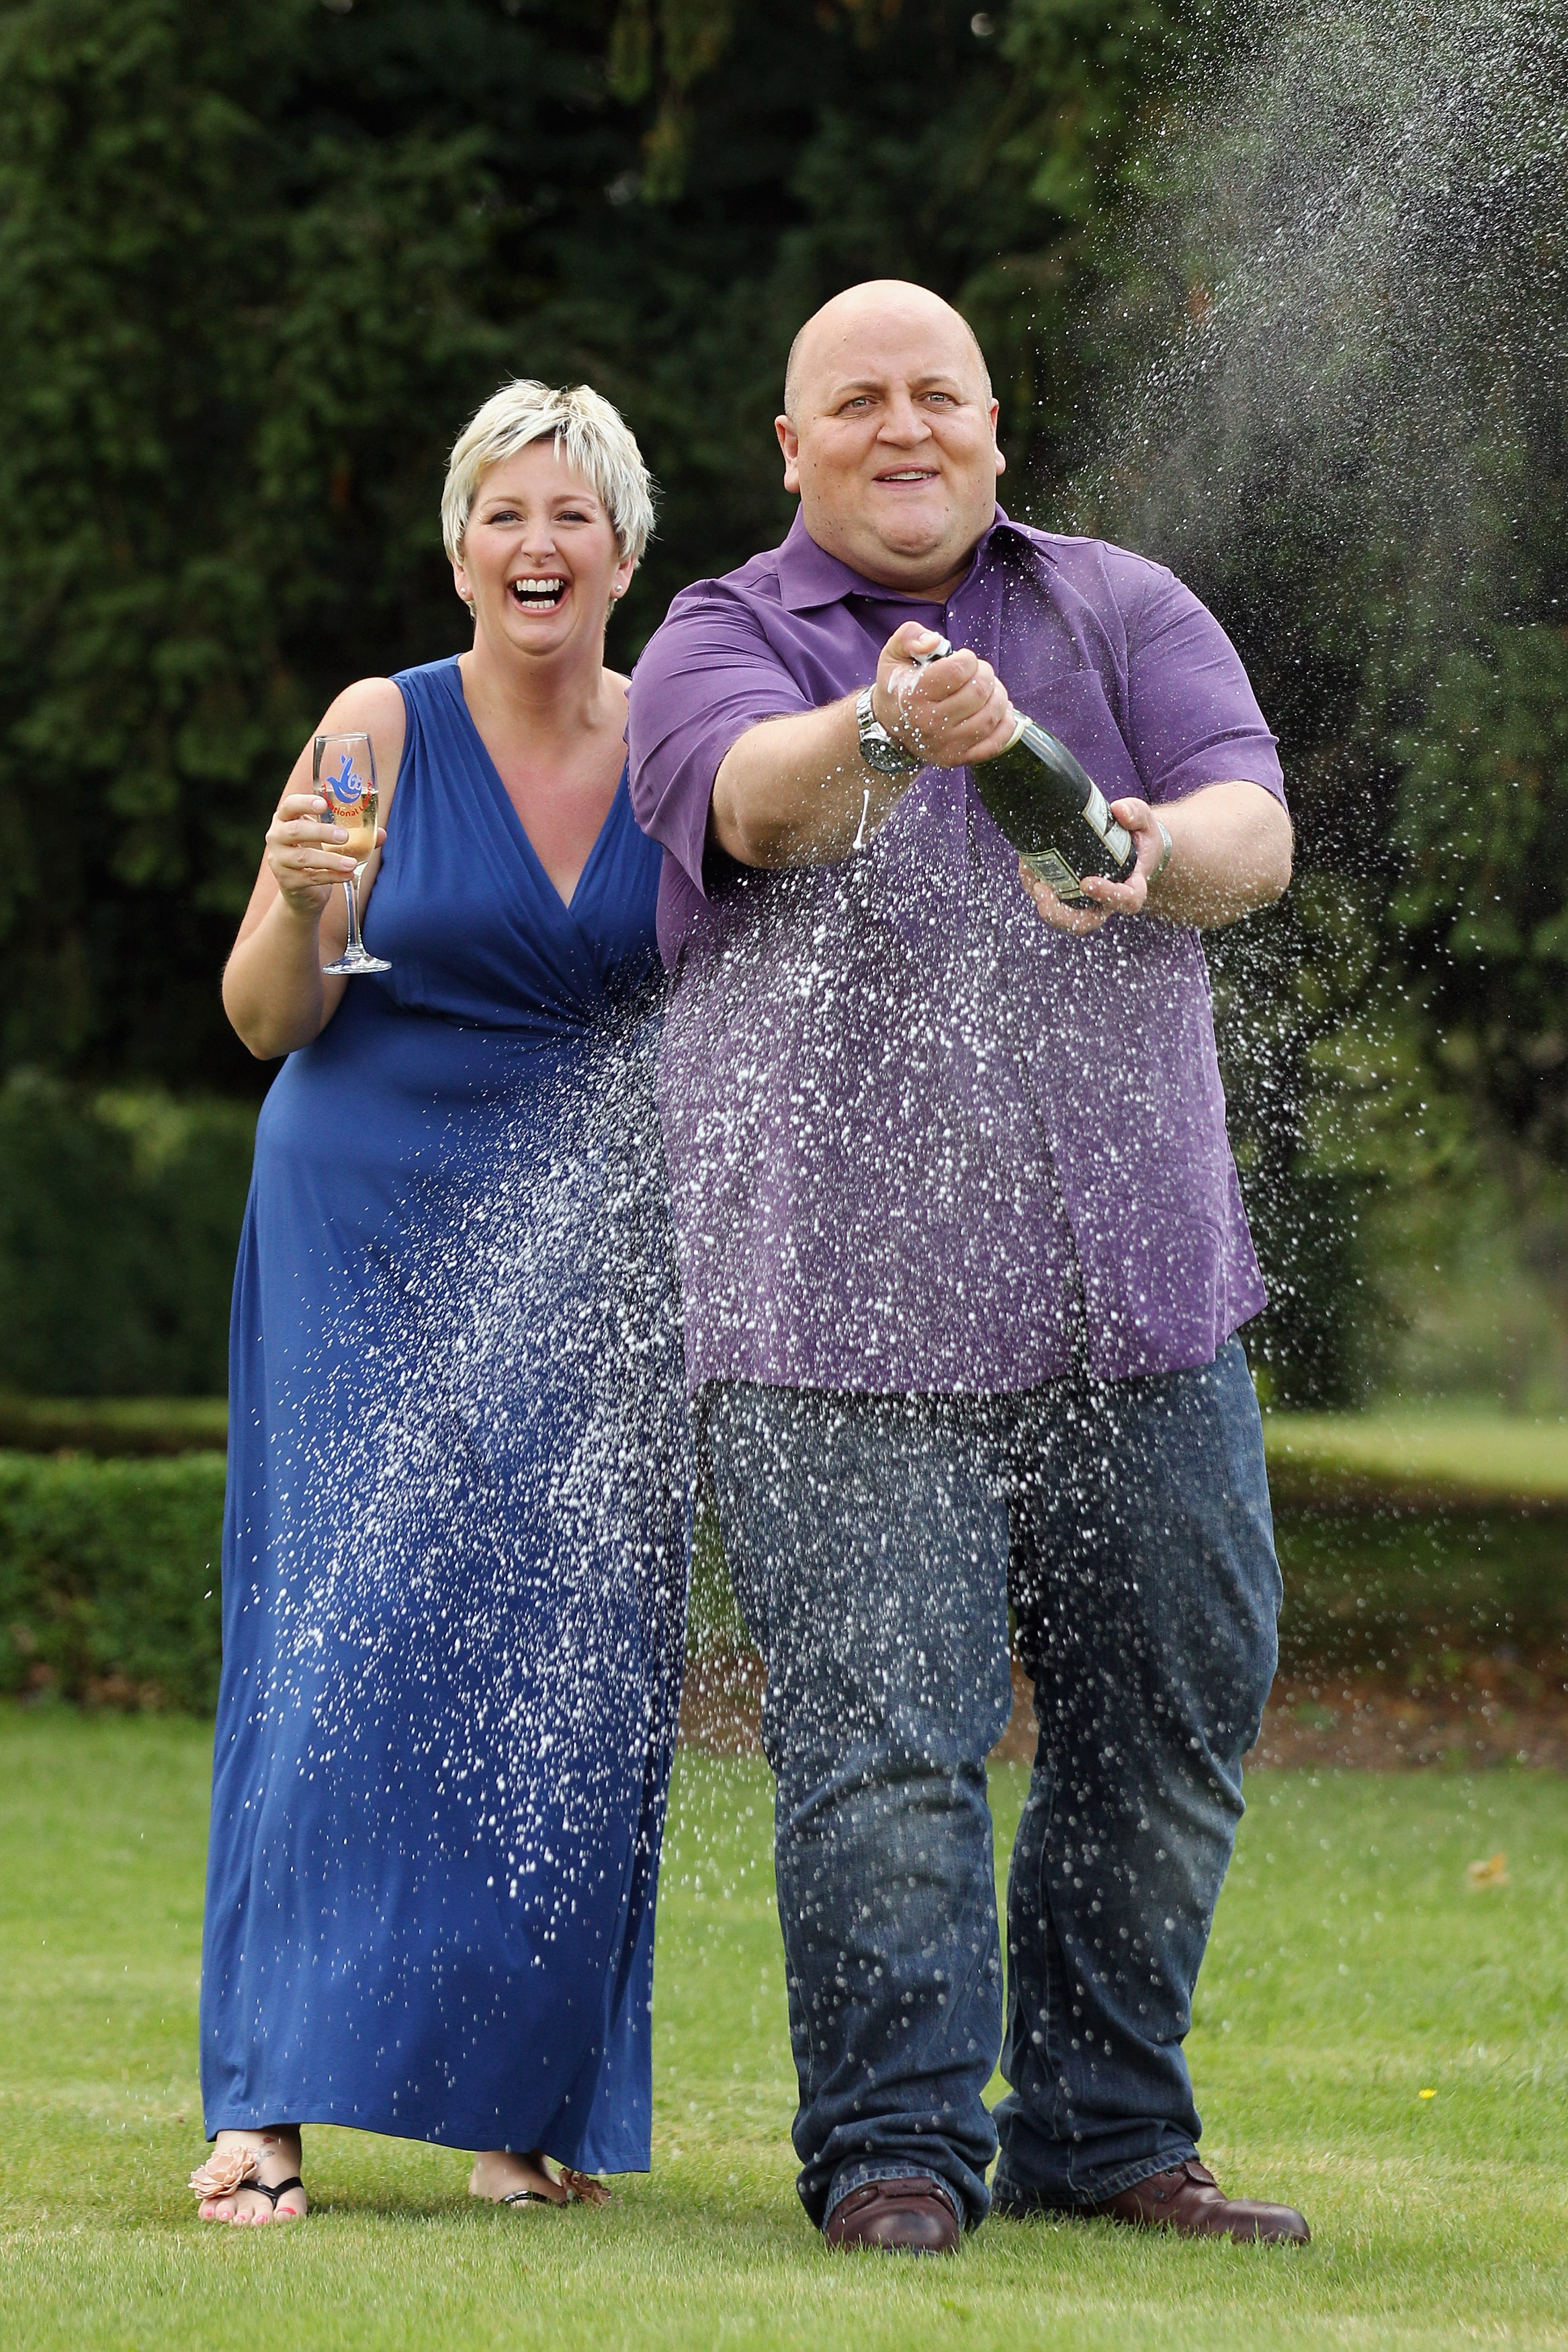 Gillian and Adrian Bayford celebrate winning the jackpot of over 148 million GBP in the EuroMillions lottery on August 14, 2012, in Hatfield Heath, England | Source: Getty Images